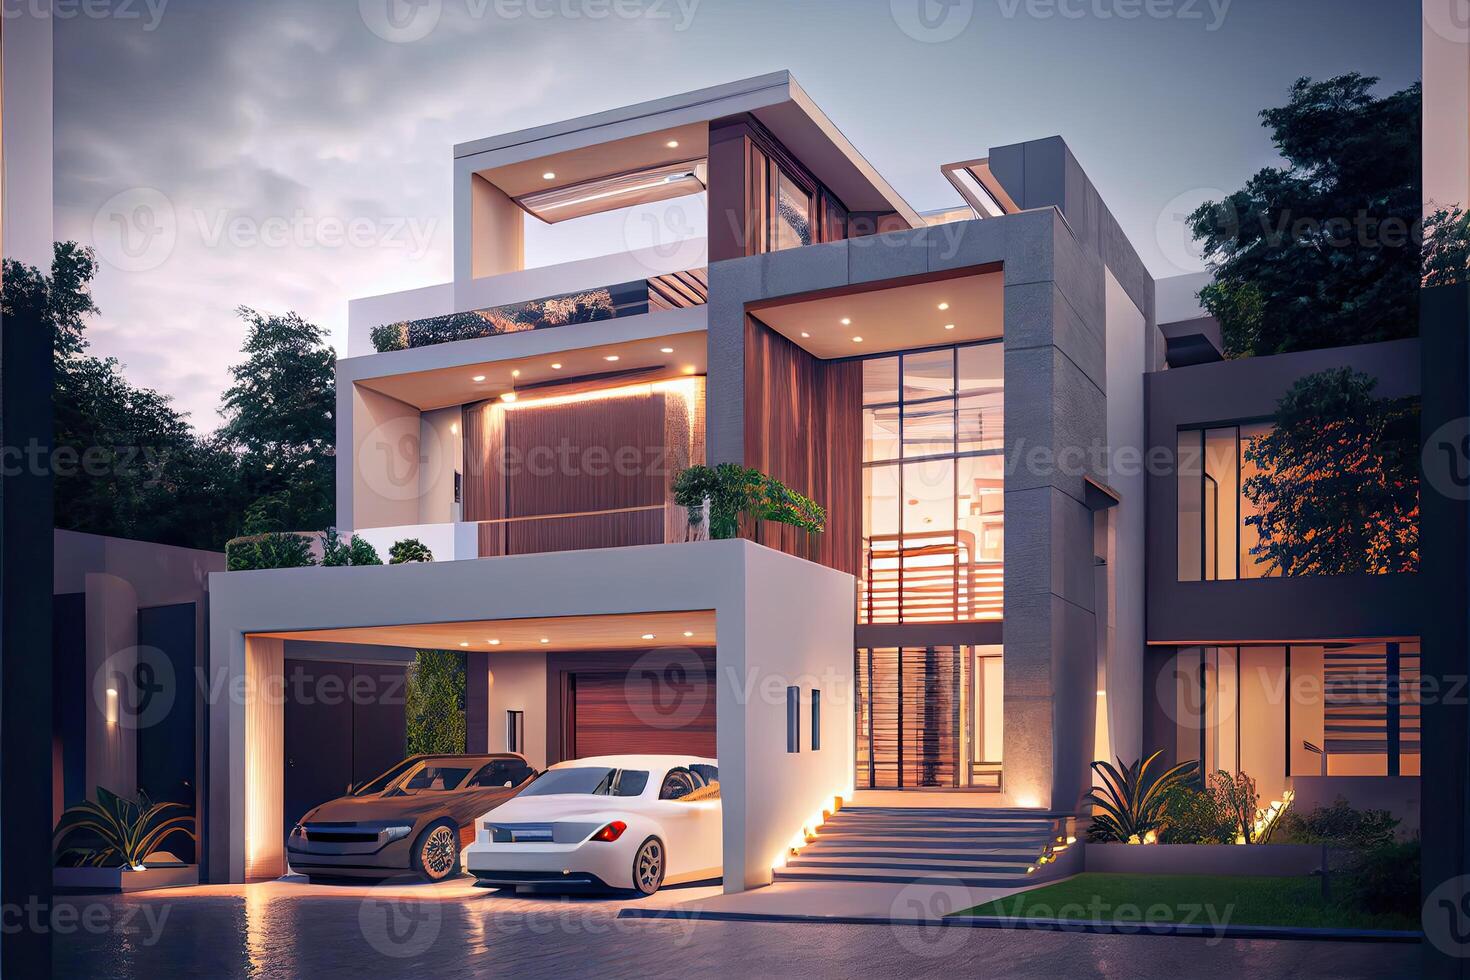 Evening view of a luxurious modern house photo